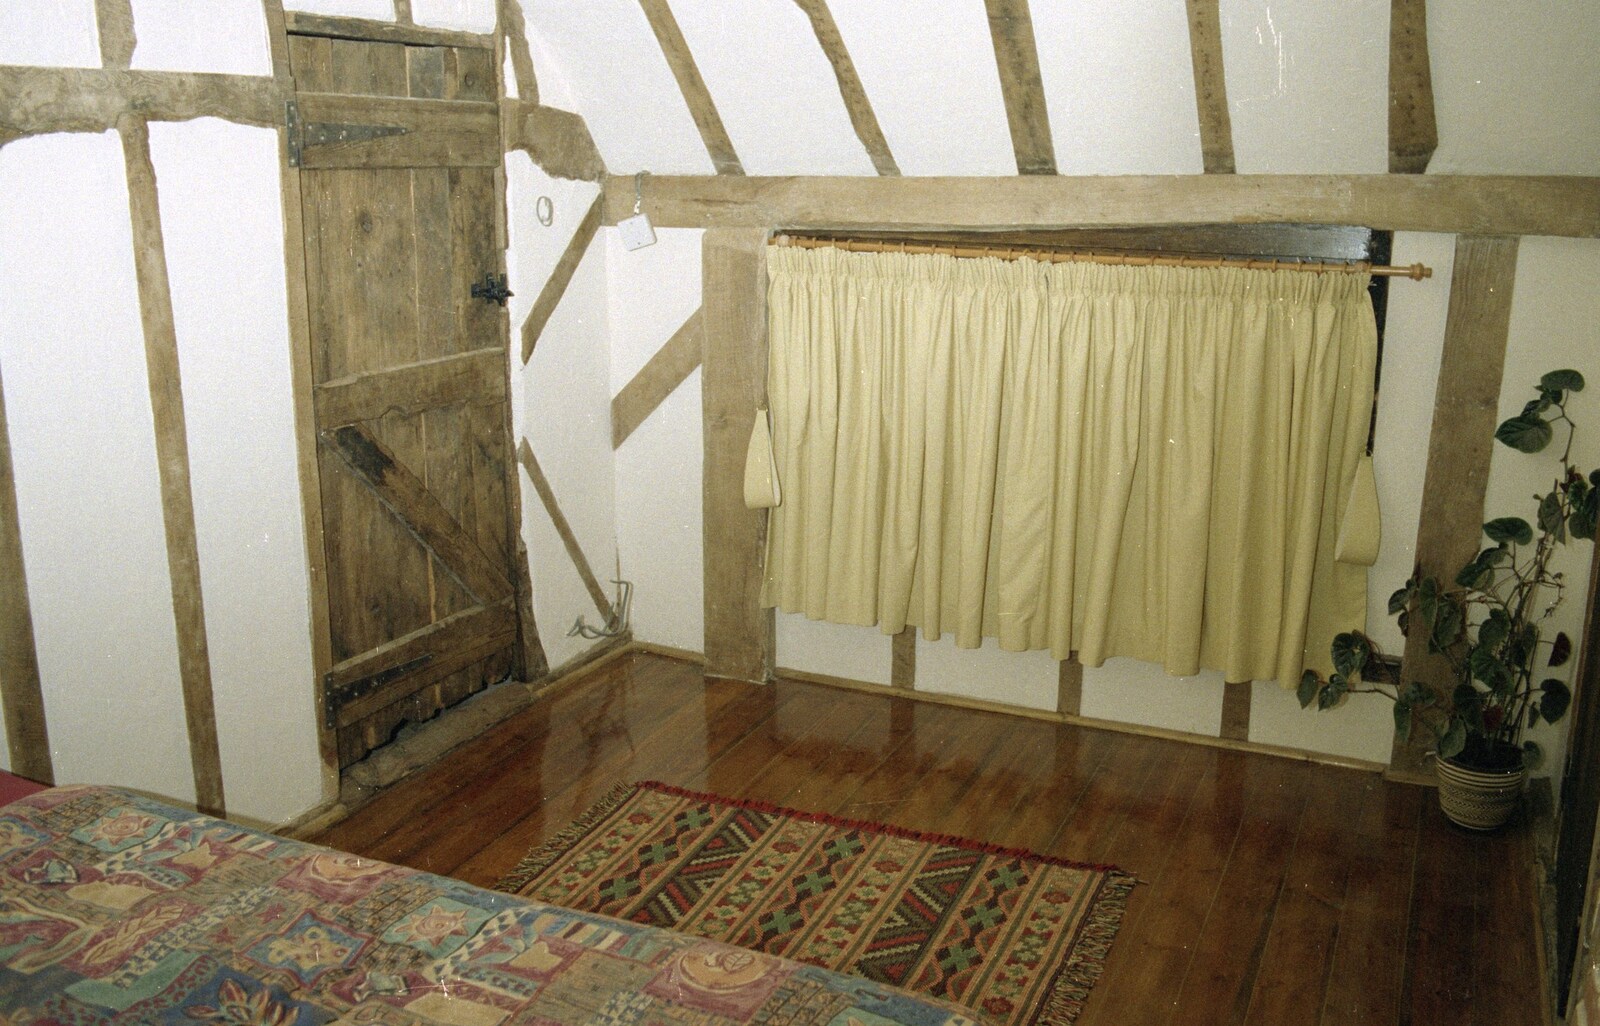 A door made from wood out of Geoff Castell's piggery from The CISU Internet Team, Bedroom Building and Ferries, Suffolk - 16th February 1996